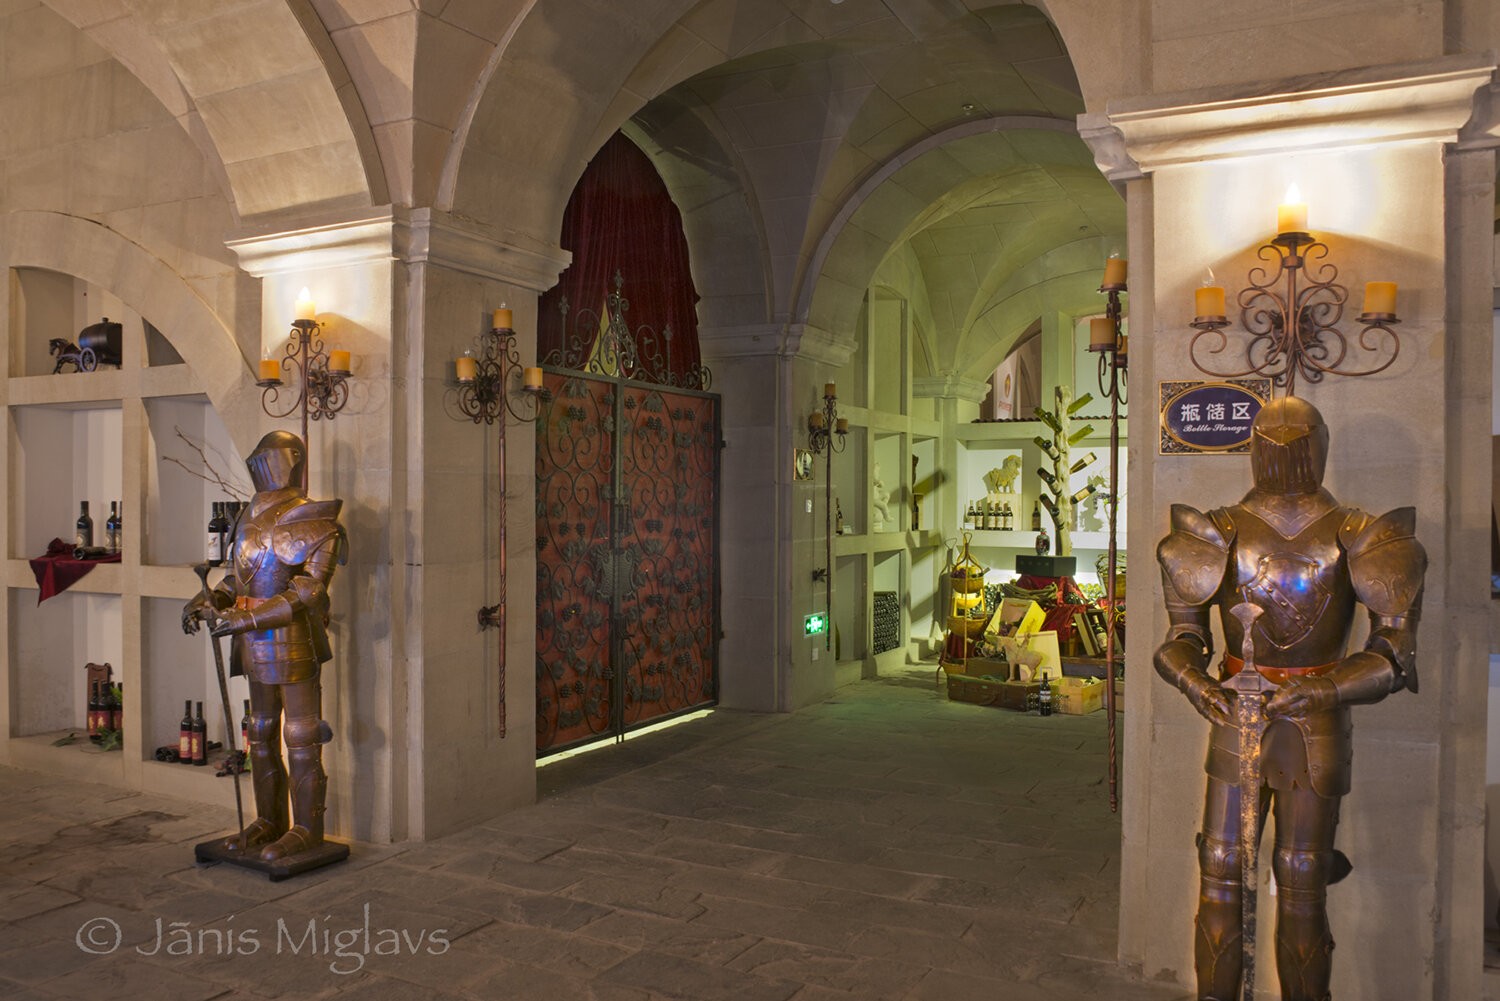 Of course, armor-clad statues guard the tasting room at Chateau Changyu Moser XV winery.